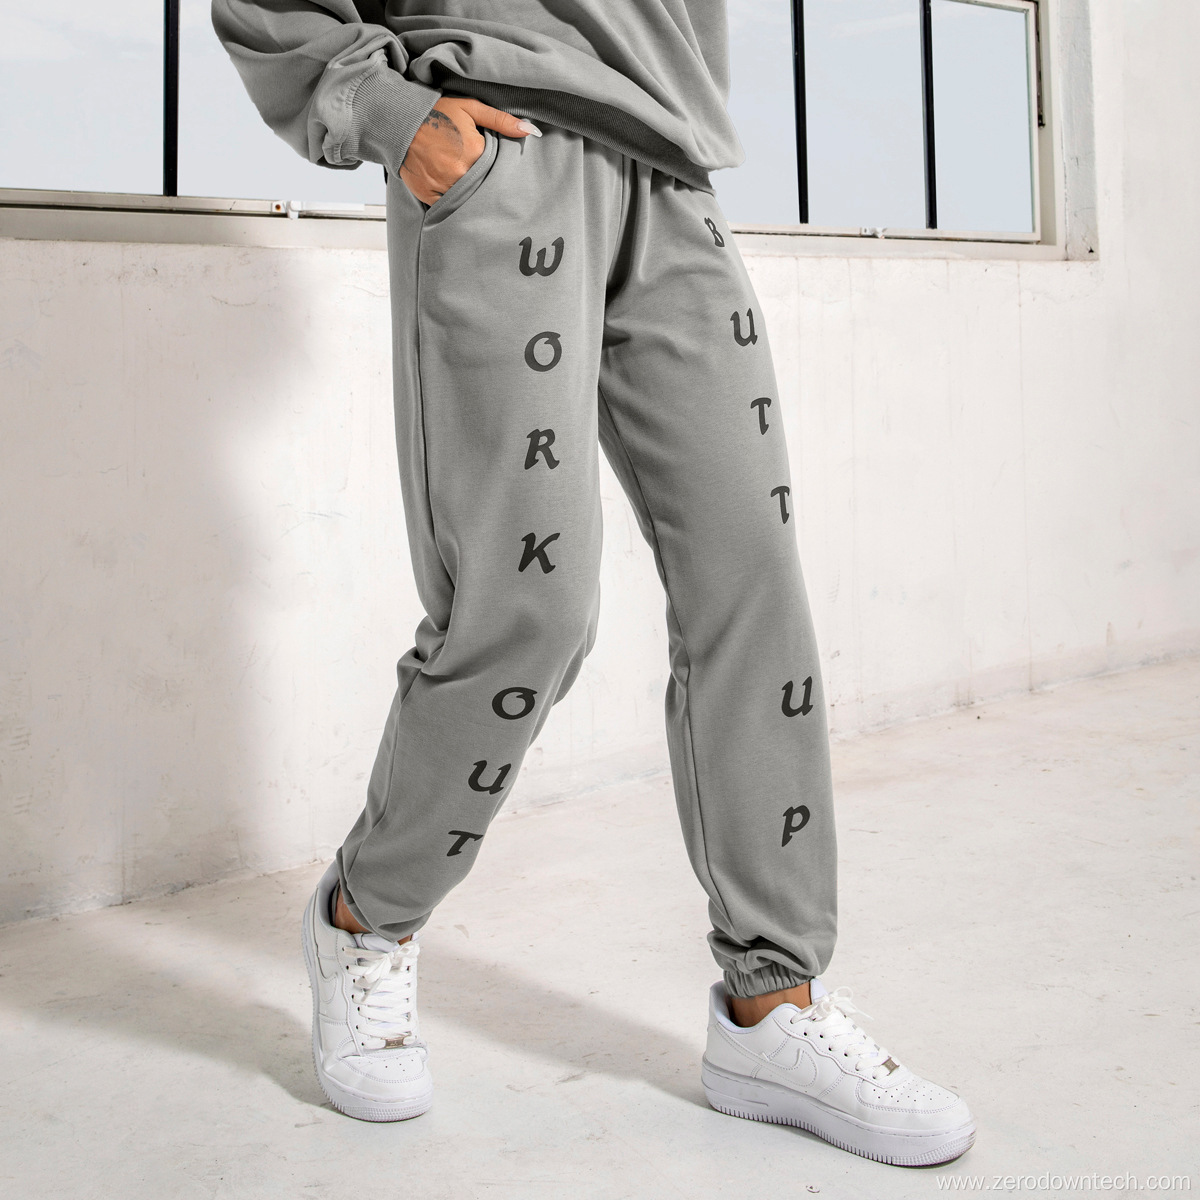 loose and thin leisure footwear sports trousers